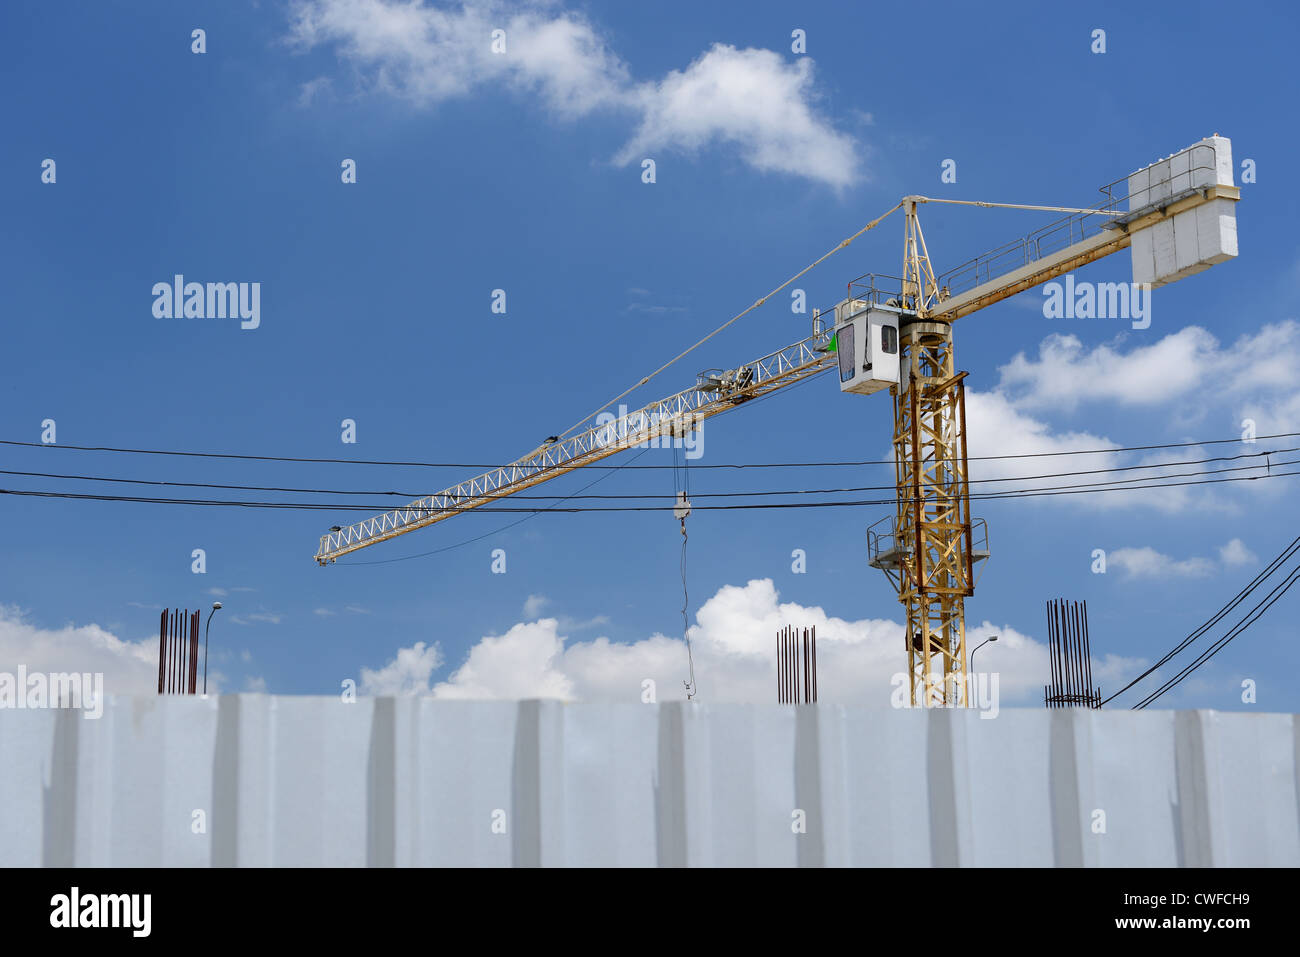 The crane is building construction behind the fence. Stock Photo